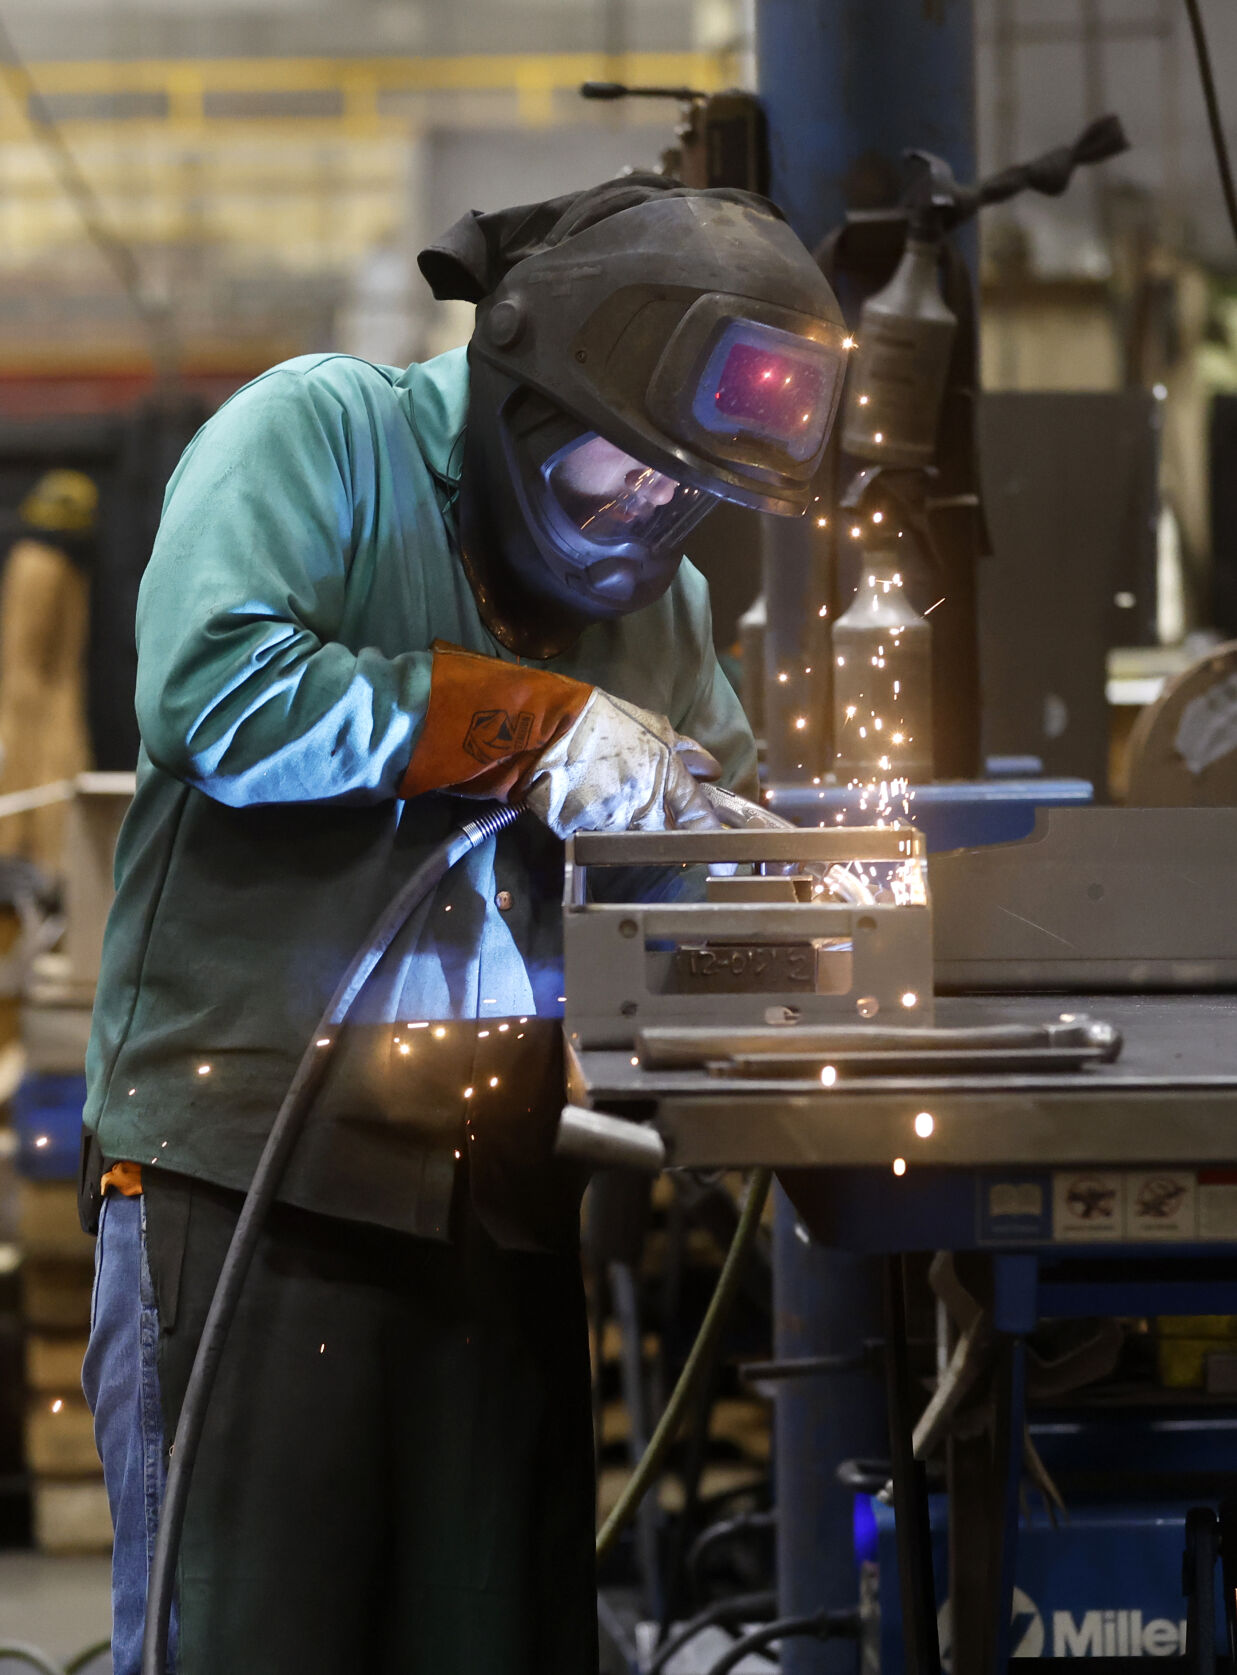 Cole Lineburg welds product at Mi-T-M Corp. in Peosta, Iowa. Over the past 50 years, Mi-T-M has grown tremendously, becoming a major force in Peosta’s business community and employing around 400 people.    PHOTO CREDIT: JESSICA REILLY
Telegraph Herald